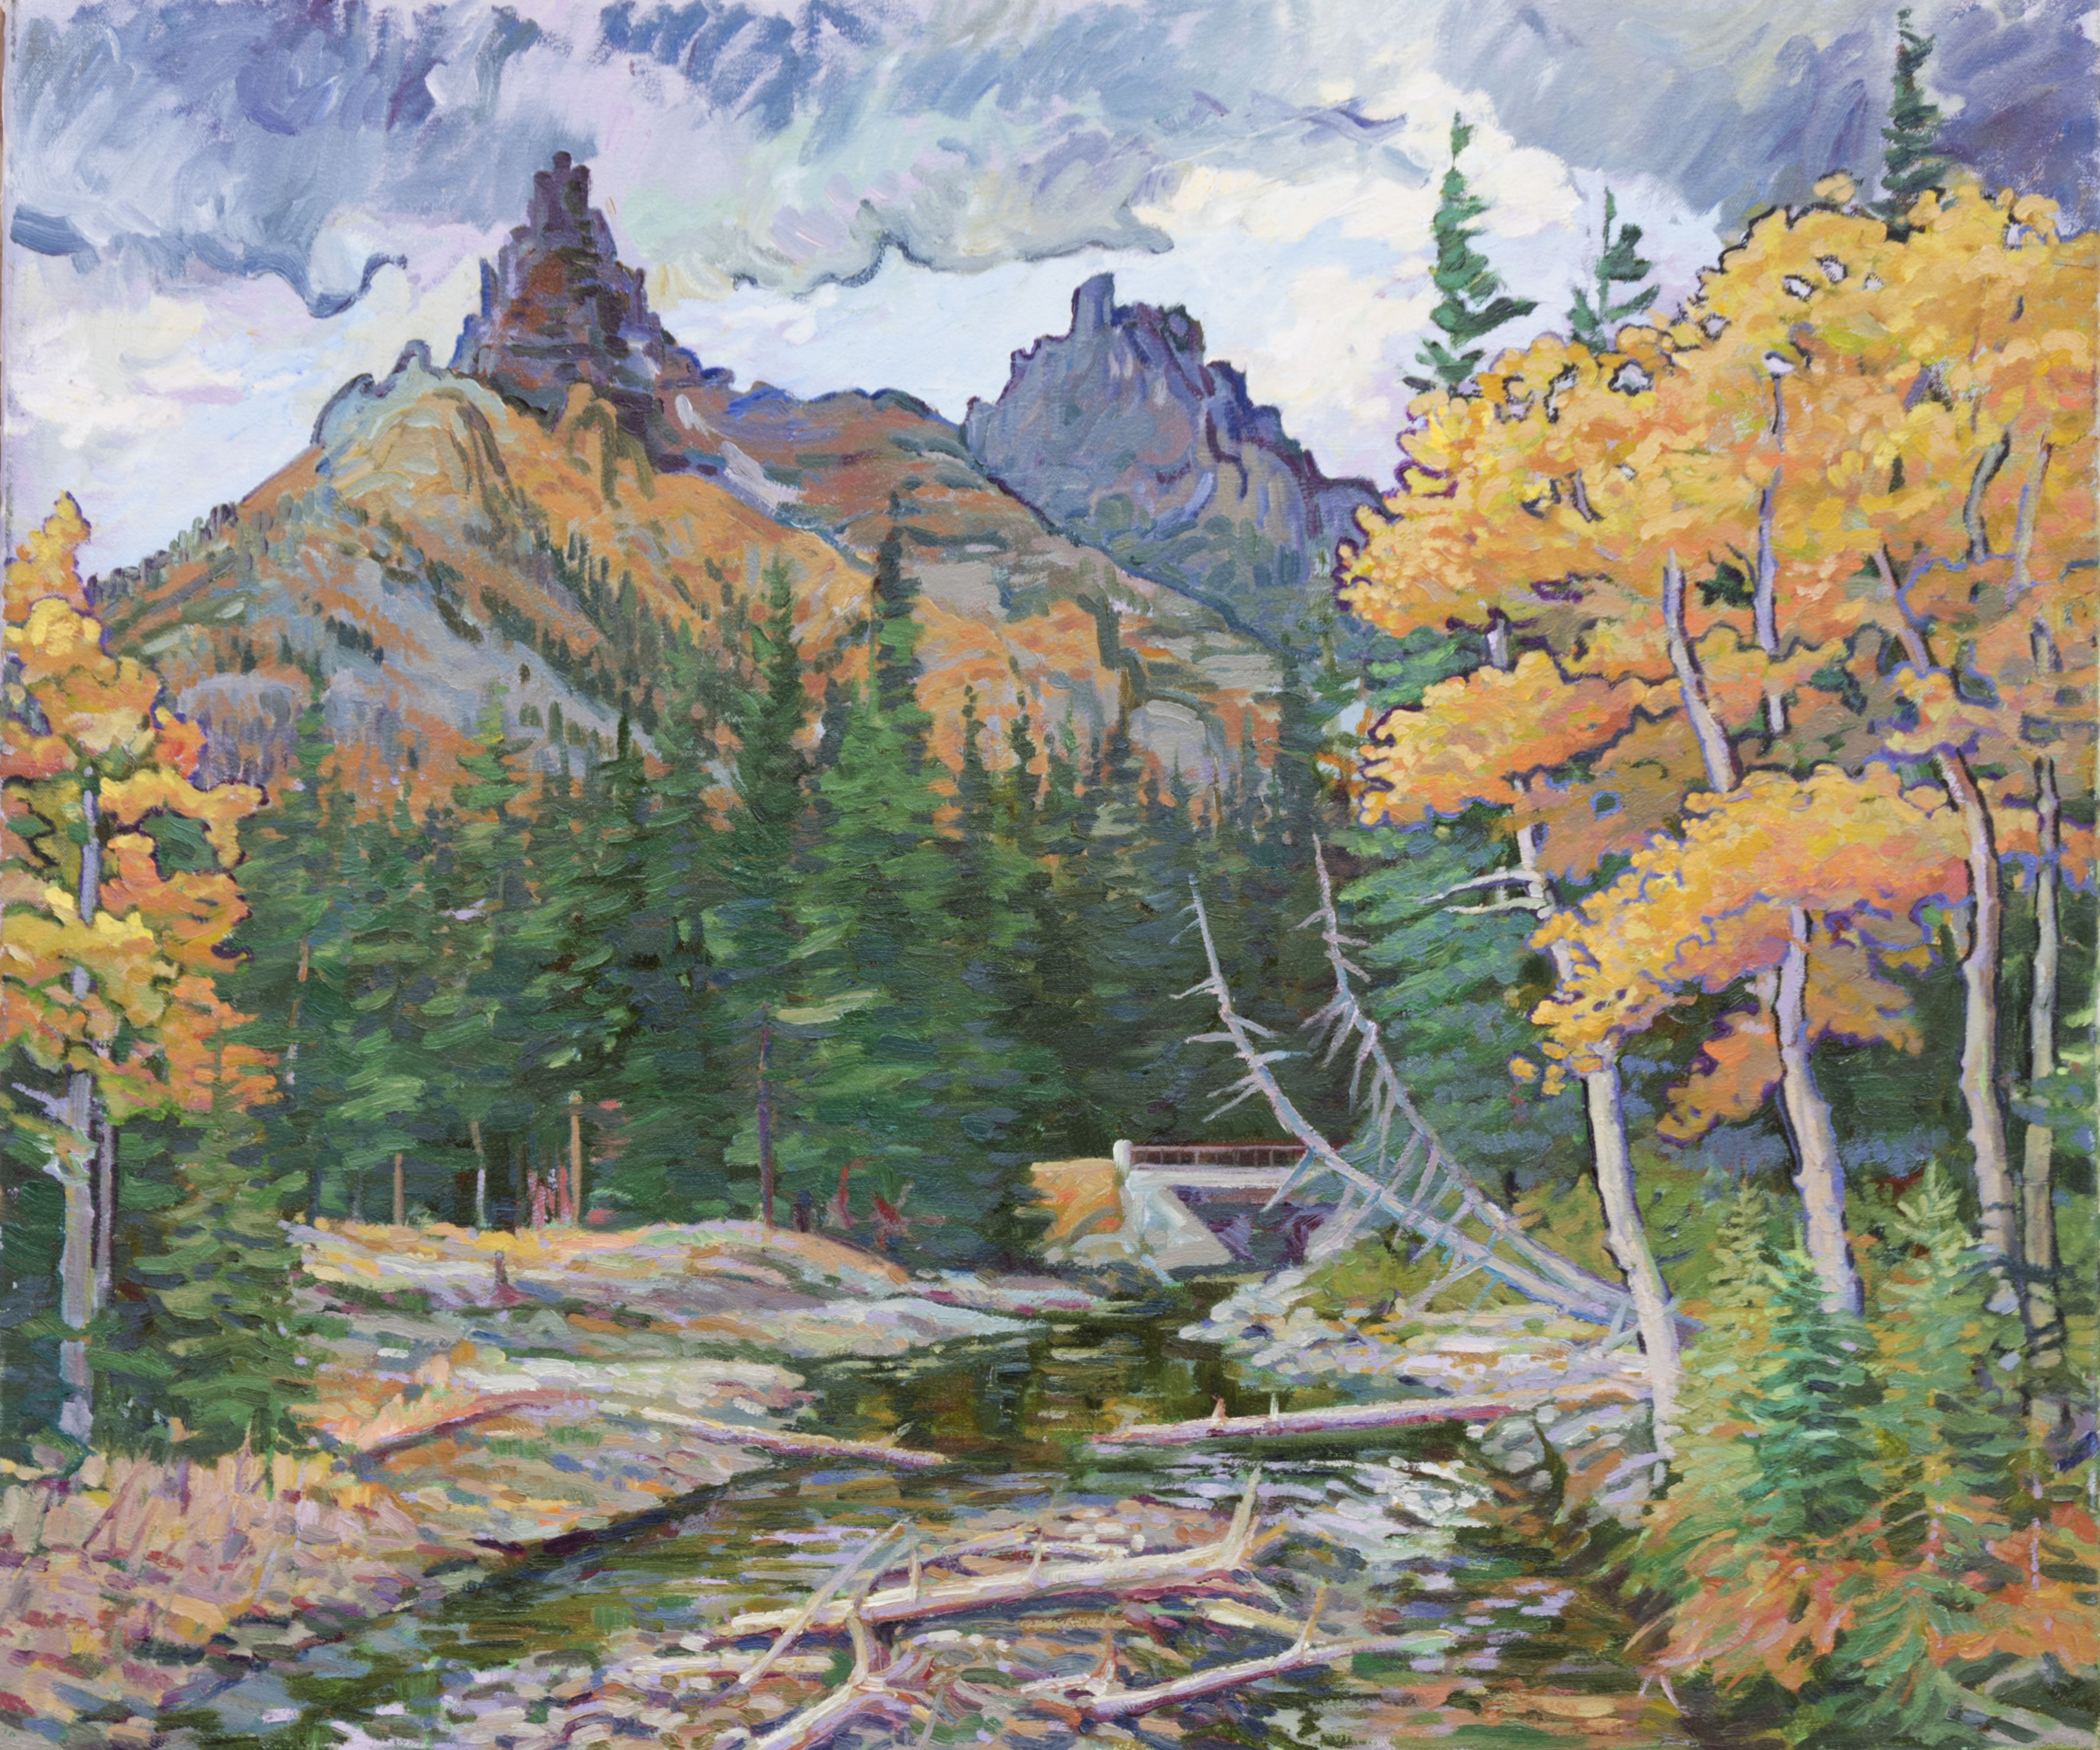 The Fingers – South Fork Wyoming  (SOLD)